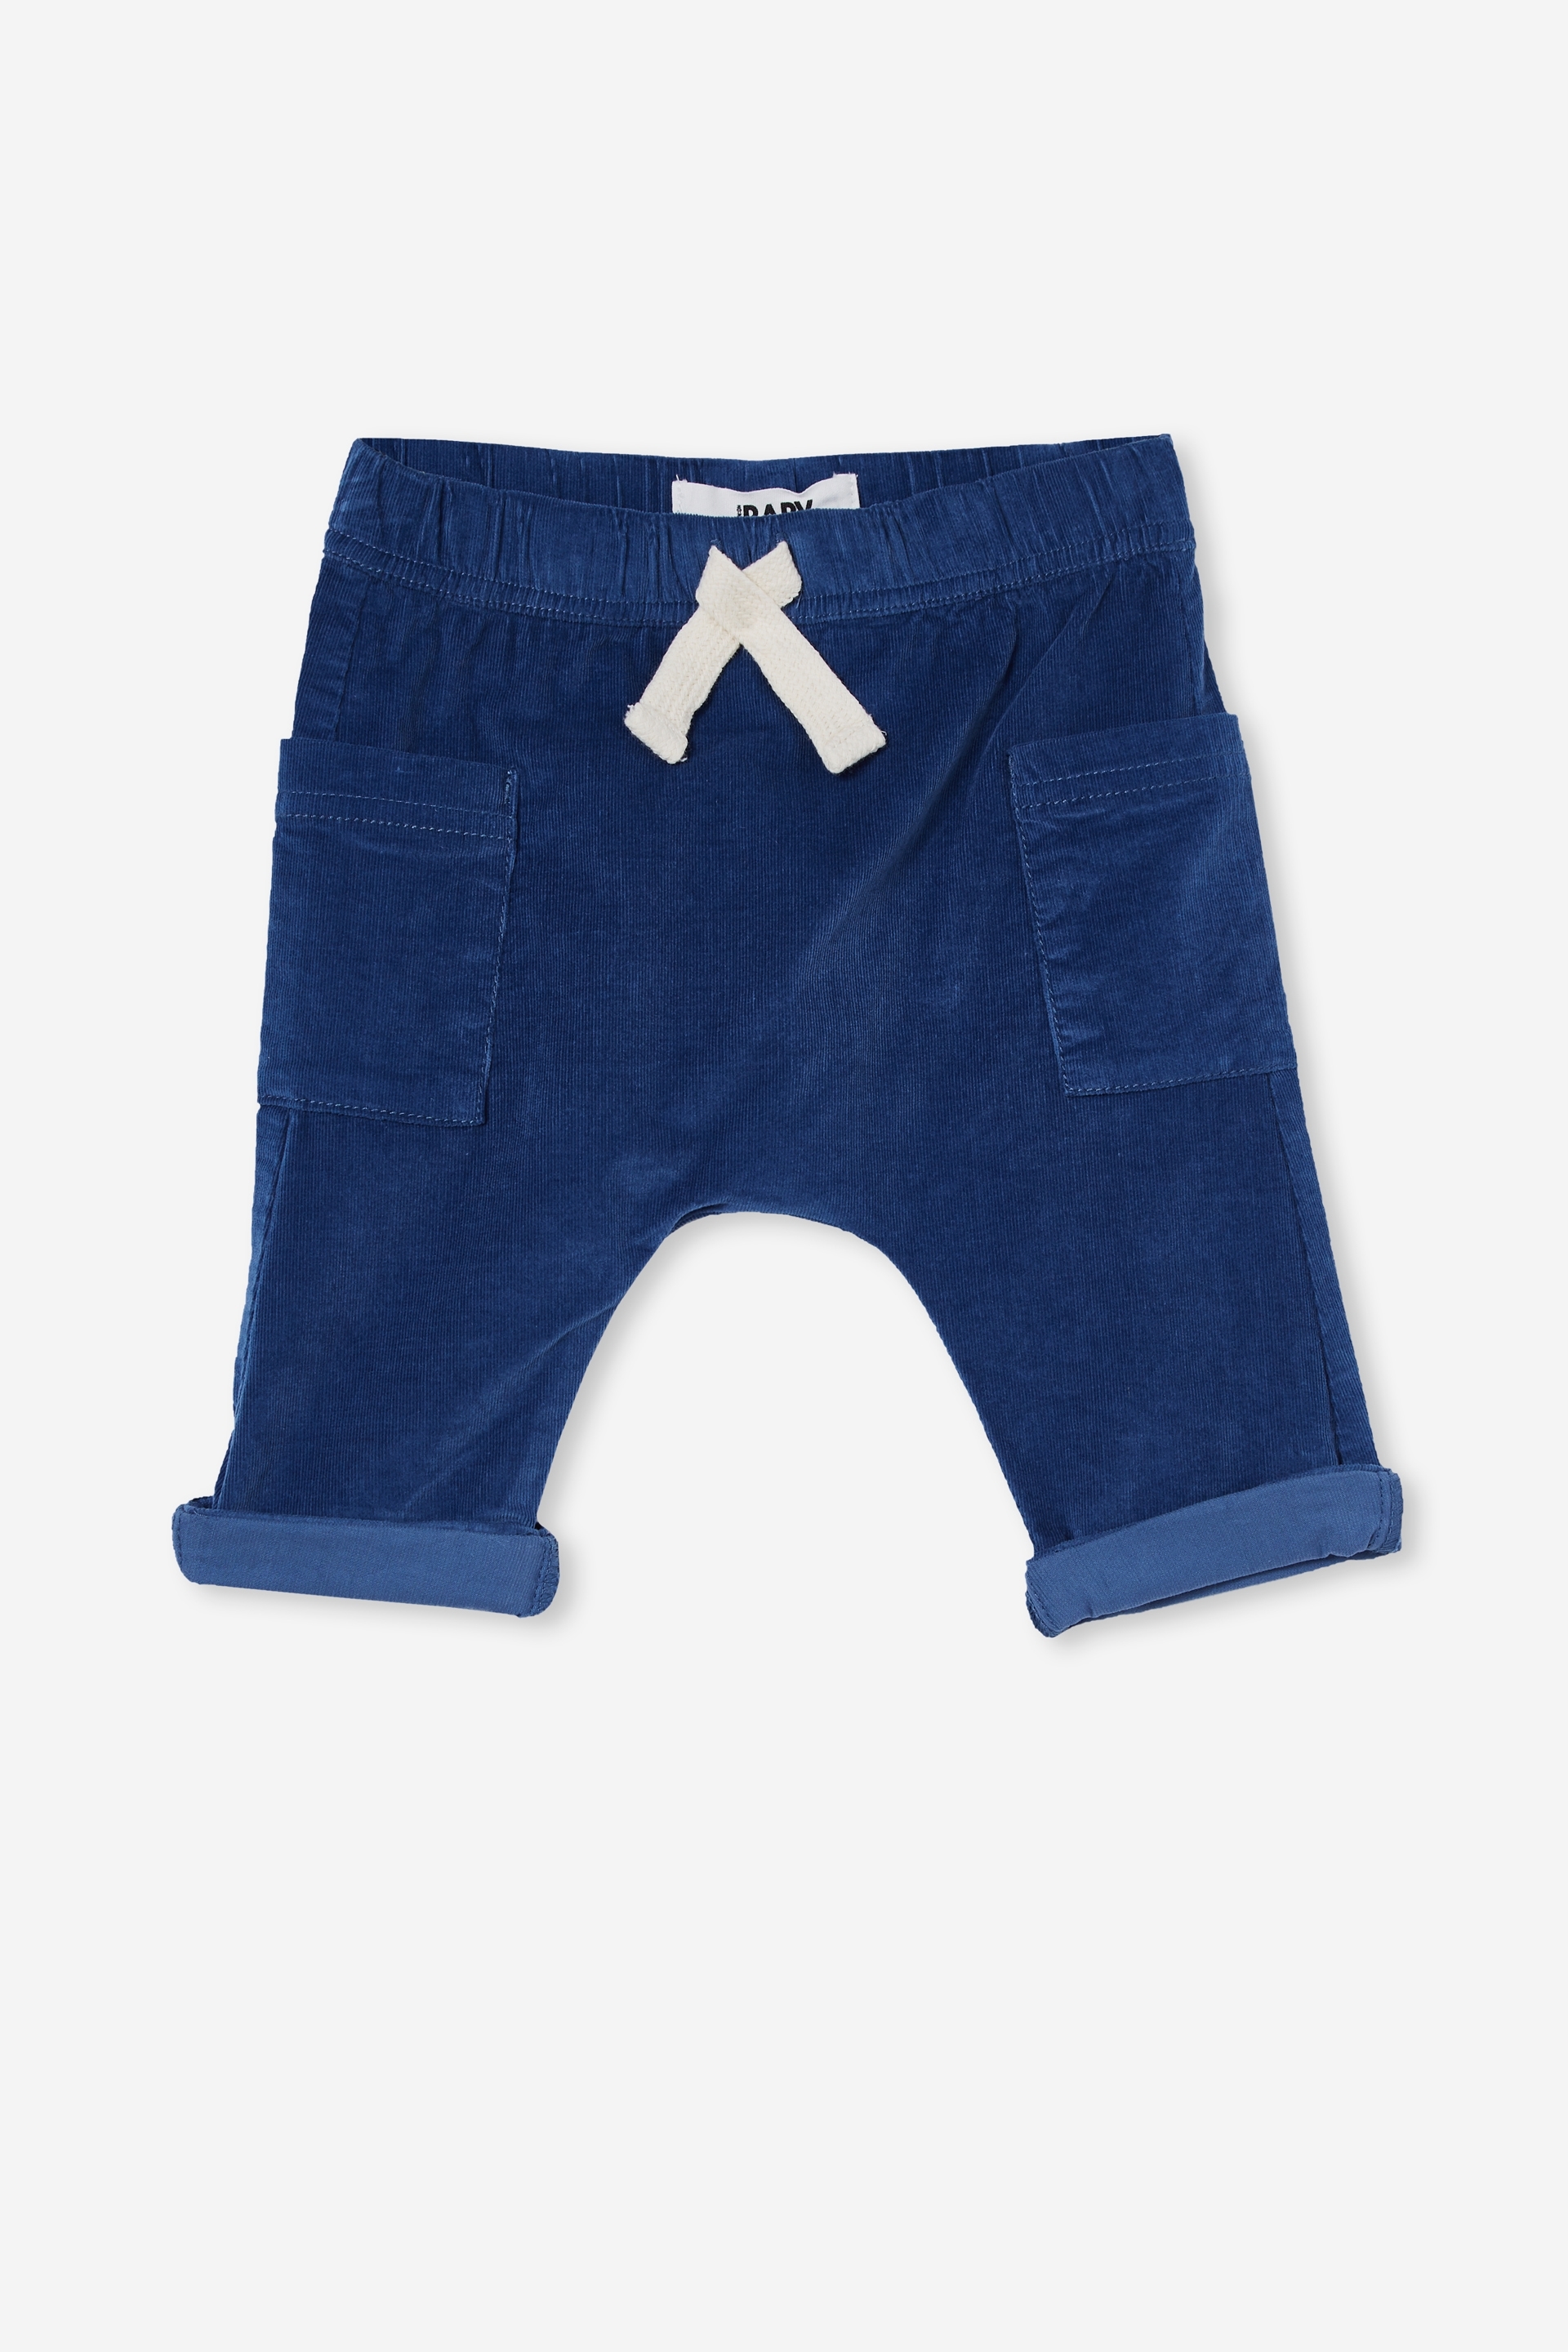 Cotton On Kids - Ted Pant - Petty blue